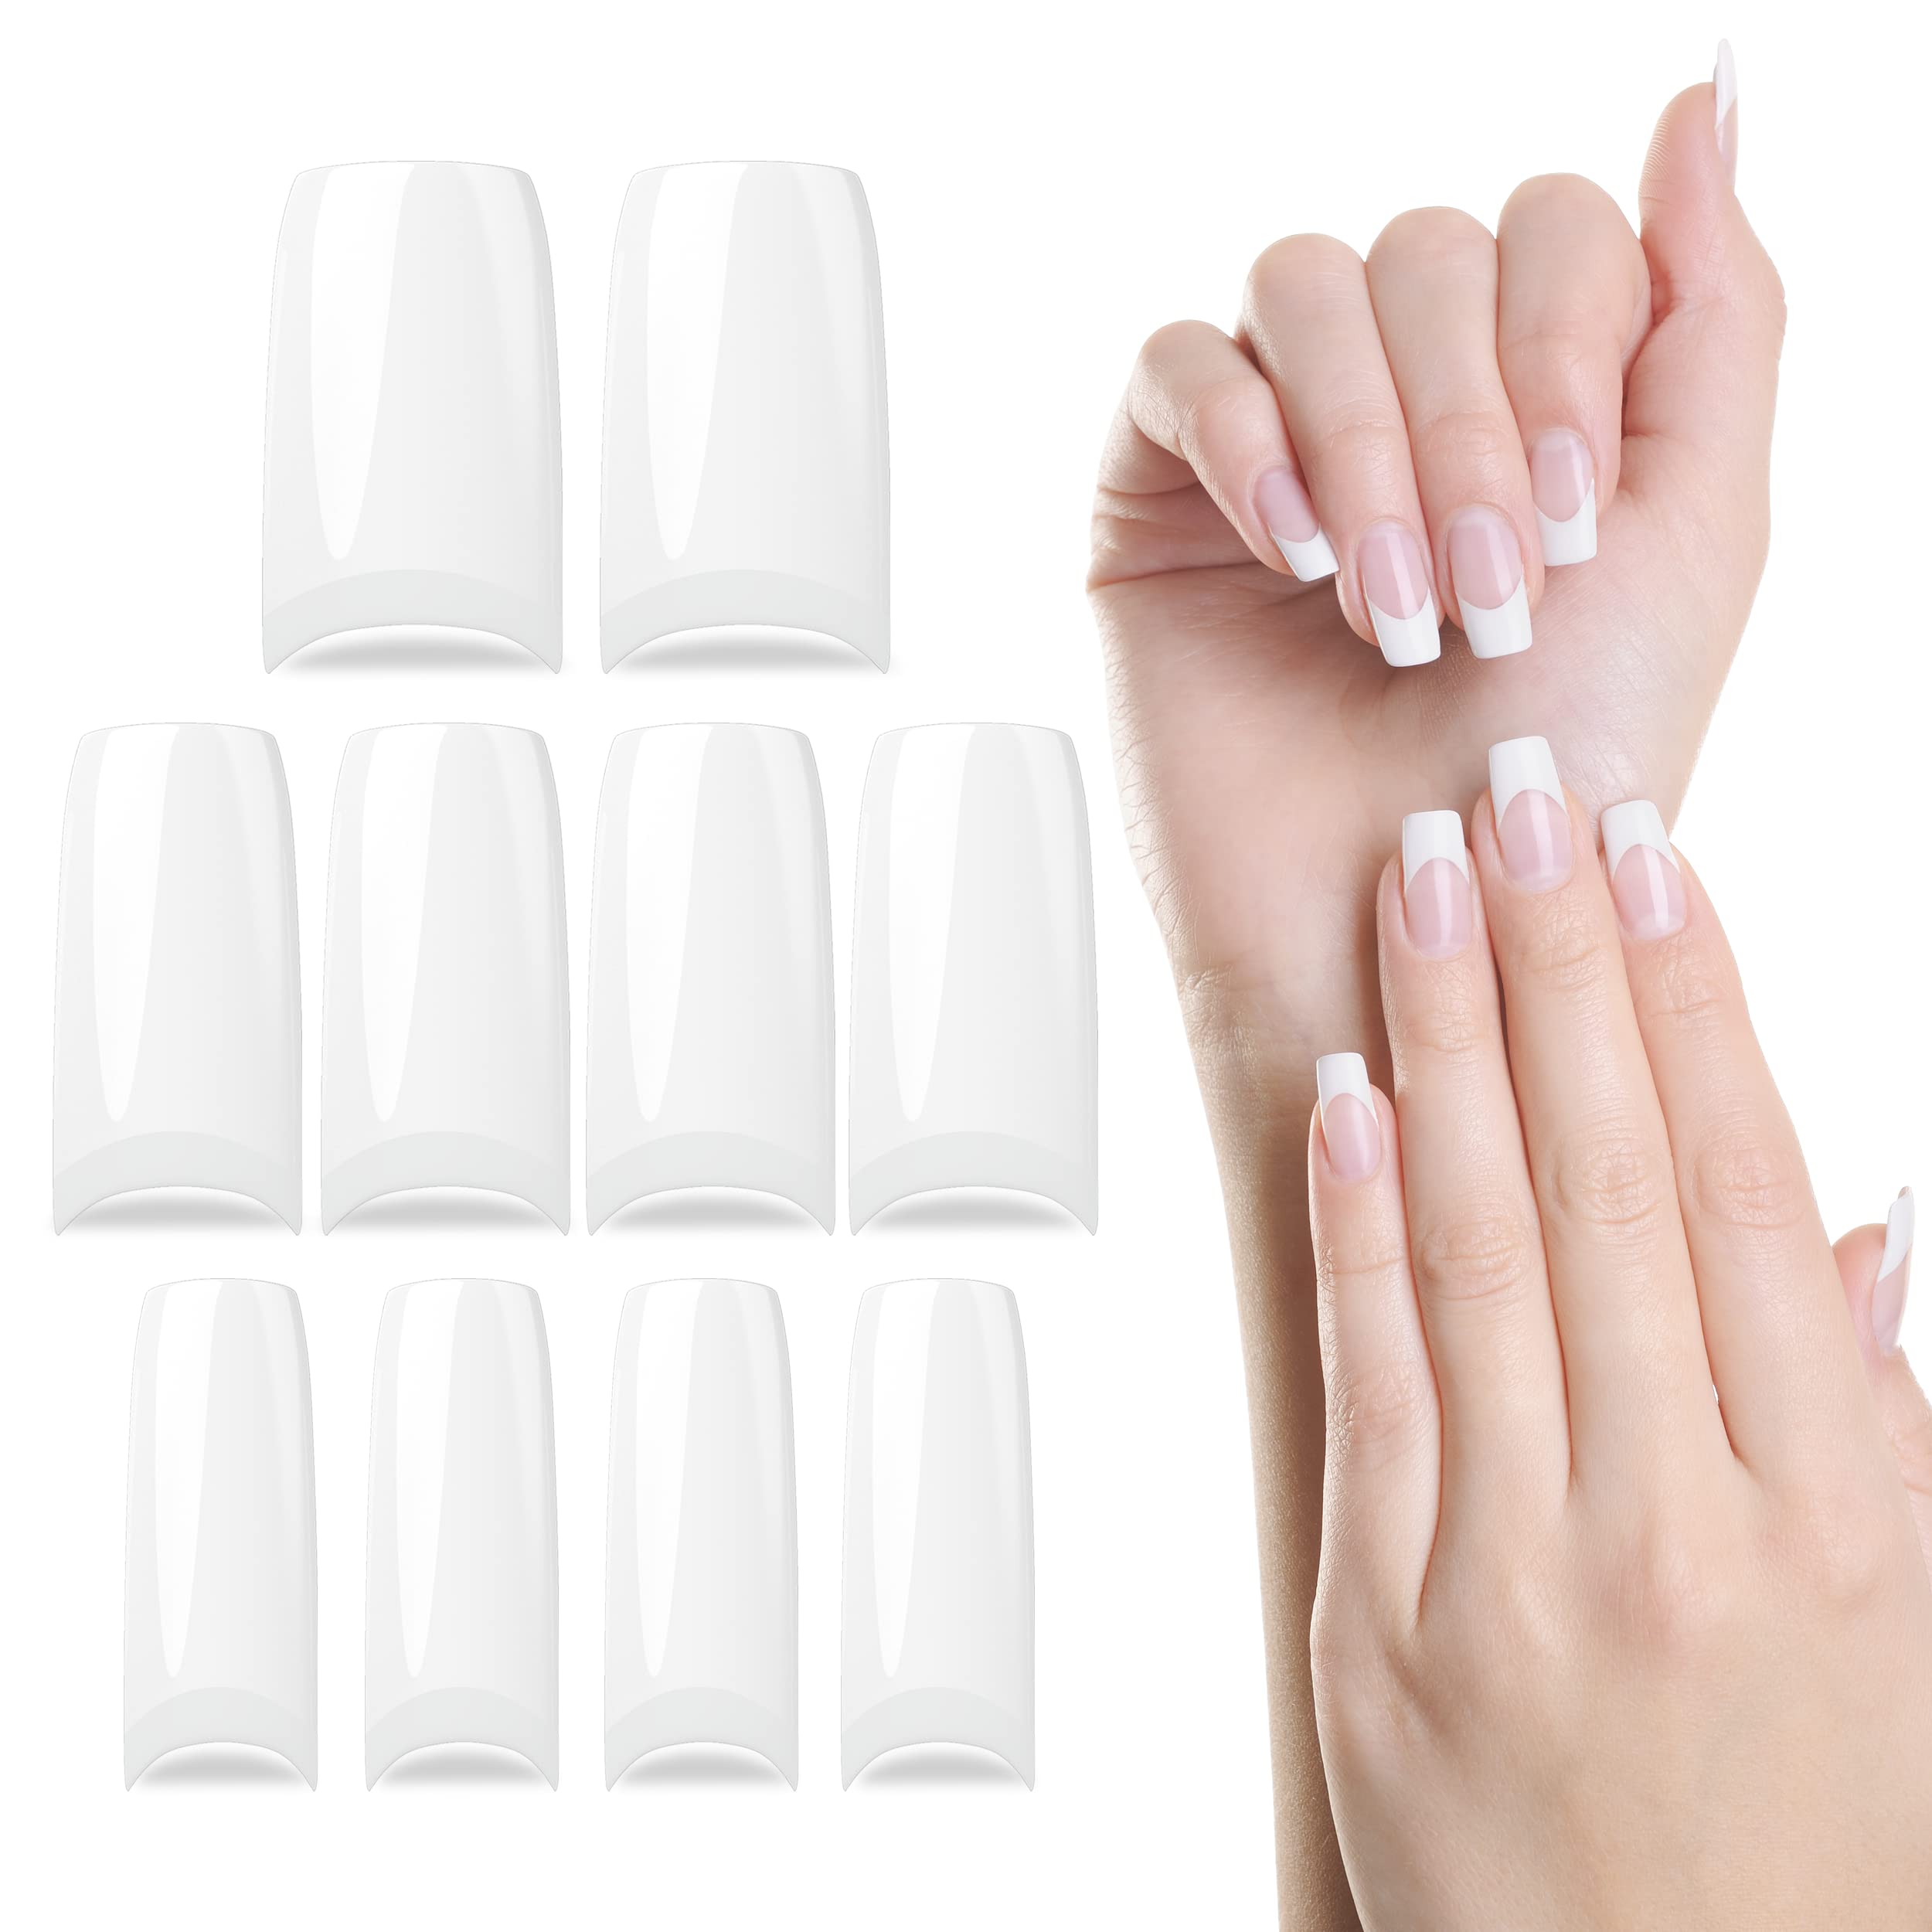 Fake Nails Tips 10 Sizes Pack of 500 – French Style Half Cover Acrylic Nails for Women & Girls - Smooth and Lightweight Oval False Nails Set for Home, Salon, DIY Nail Art - Natural Colour